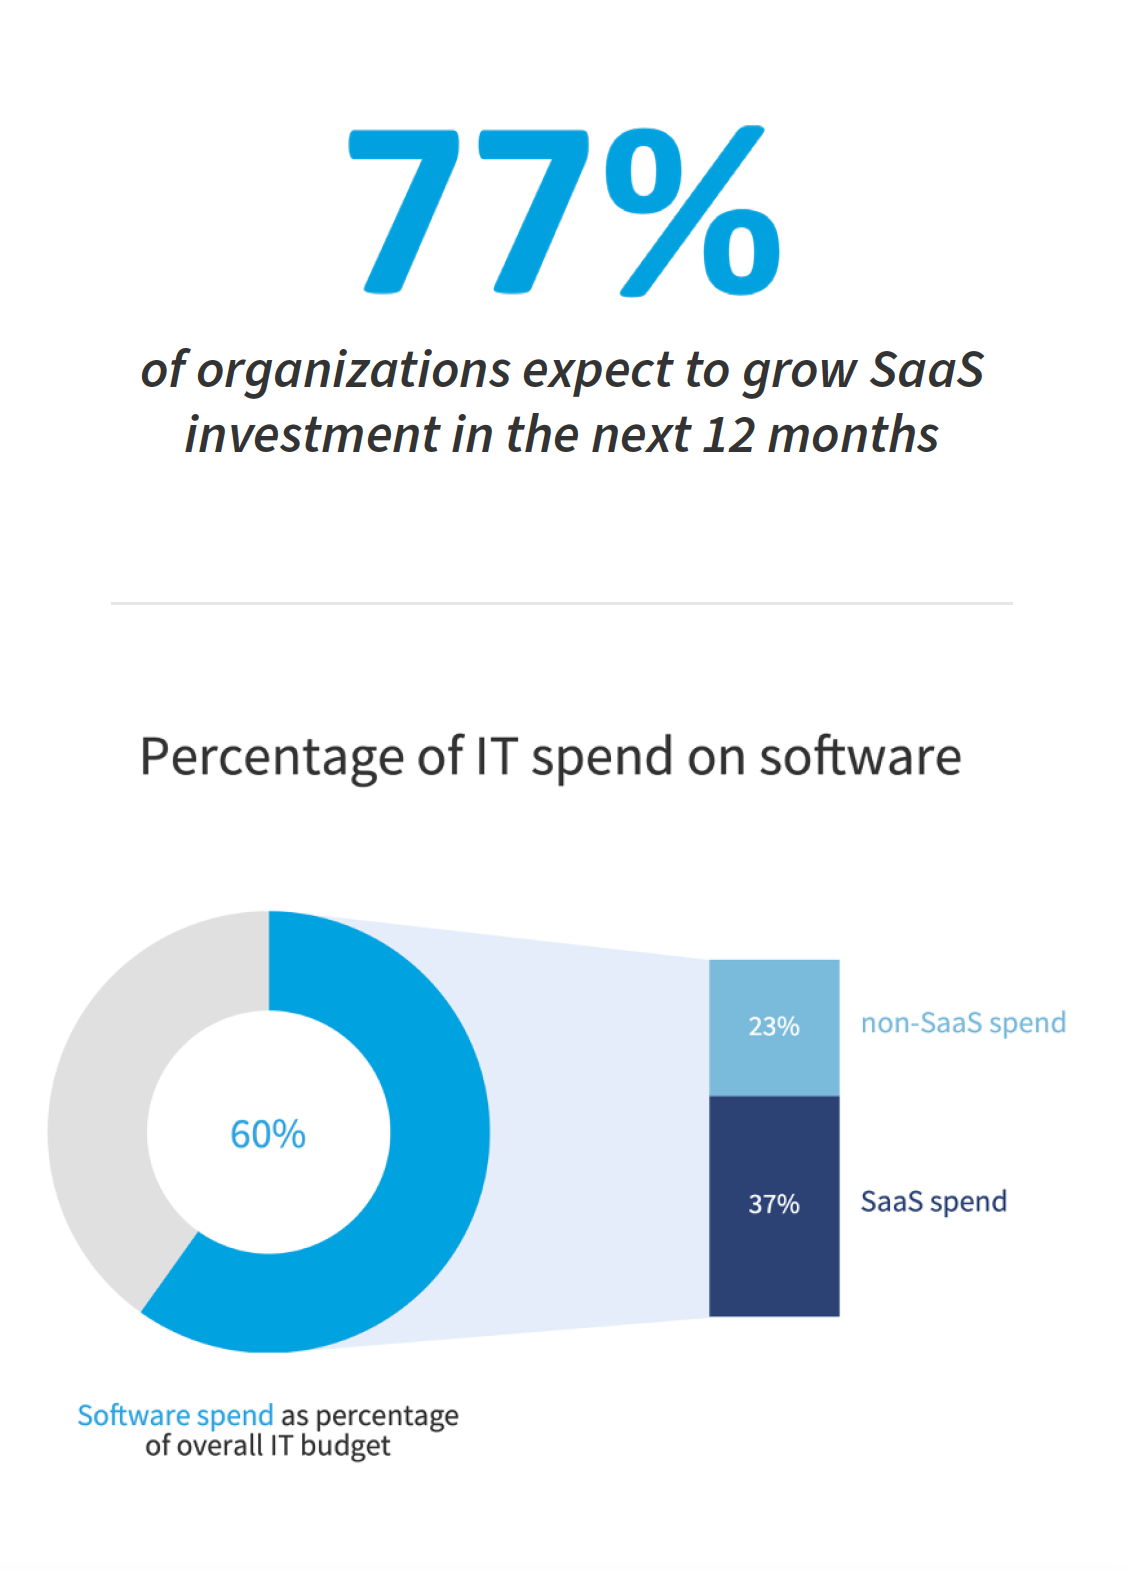 Percentage of IT spend on software